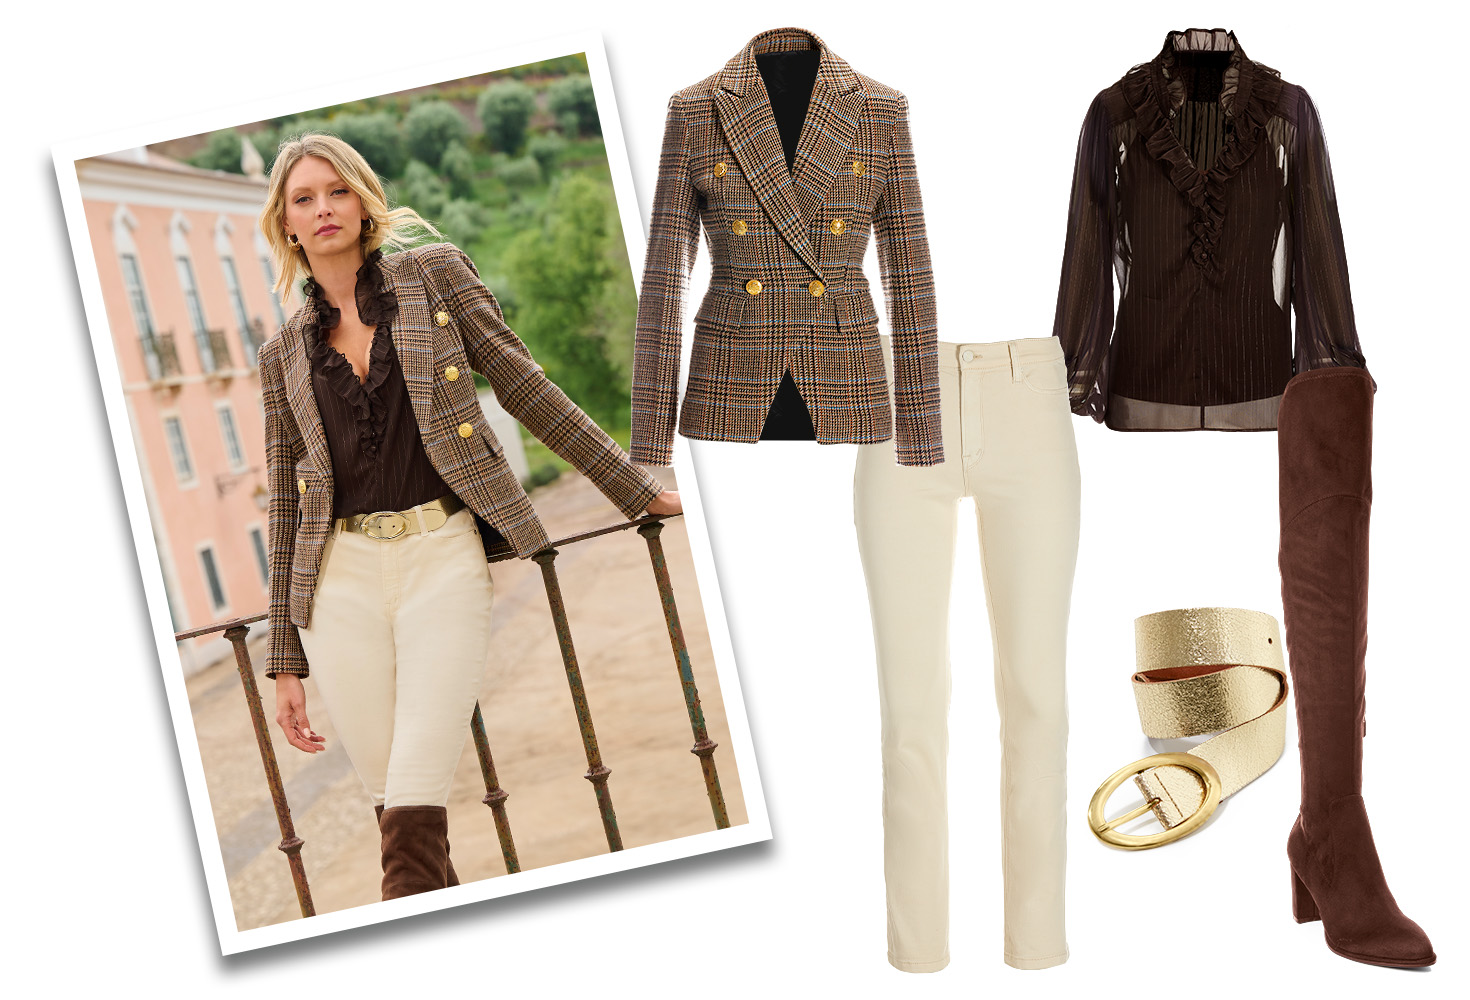 model wearing a brown plaid blazer, brown ruffle peasant blouse, gold belt, cream colored jeans, and brown over-the-knee suede boots. right panel shows all items on model.